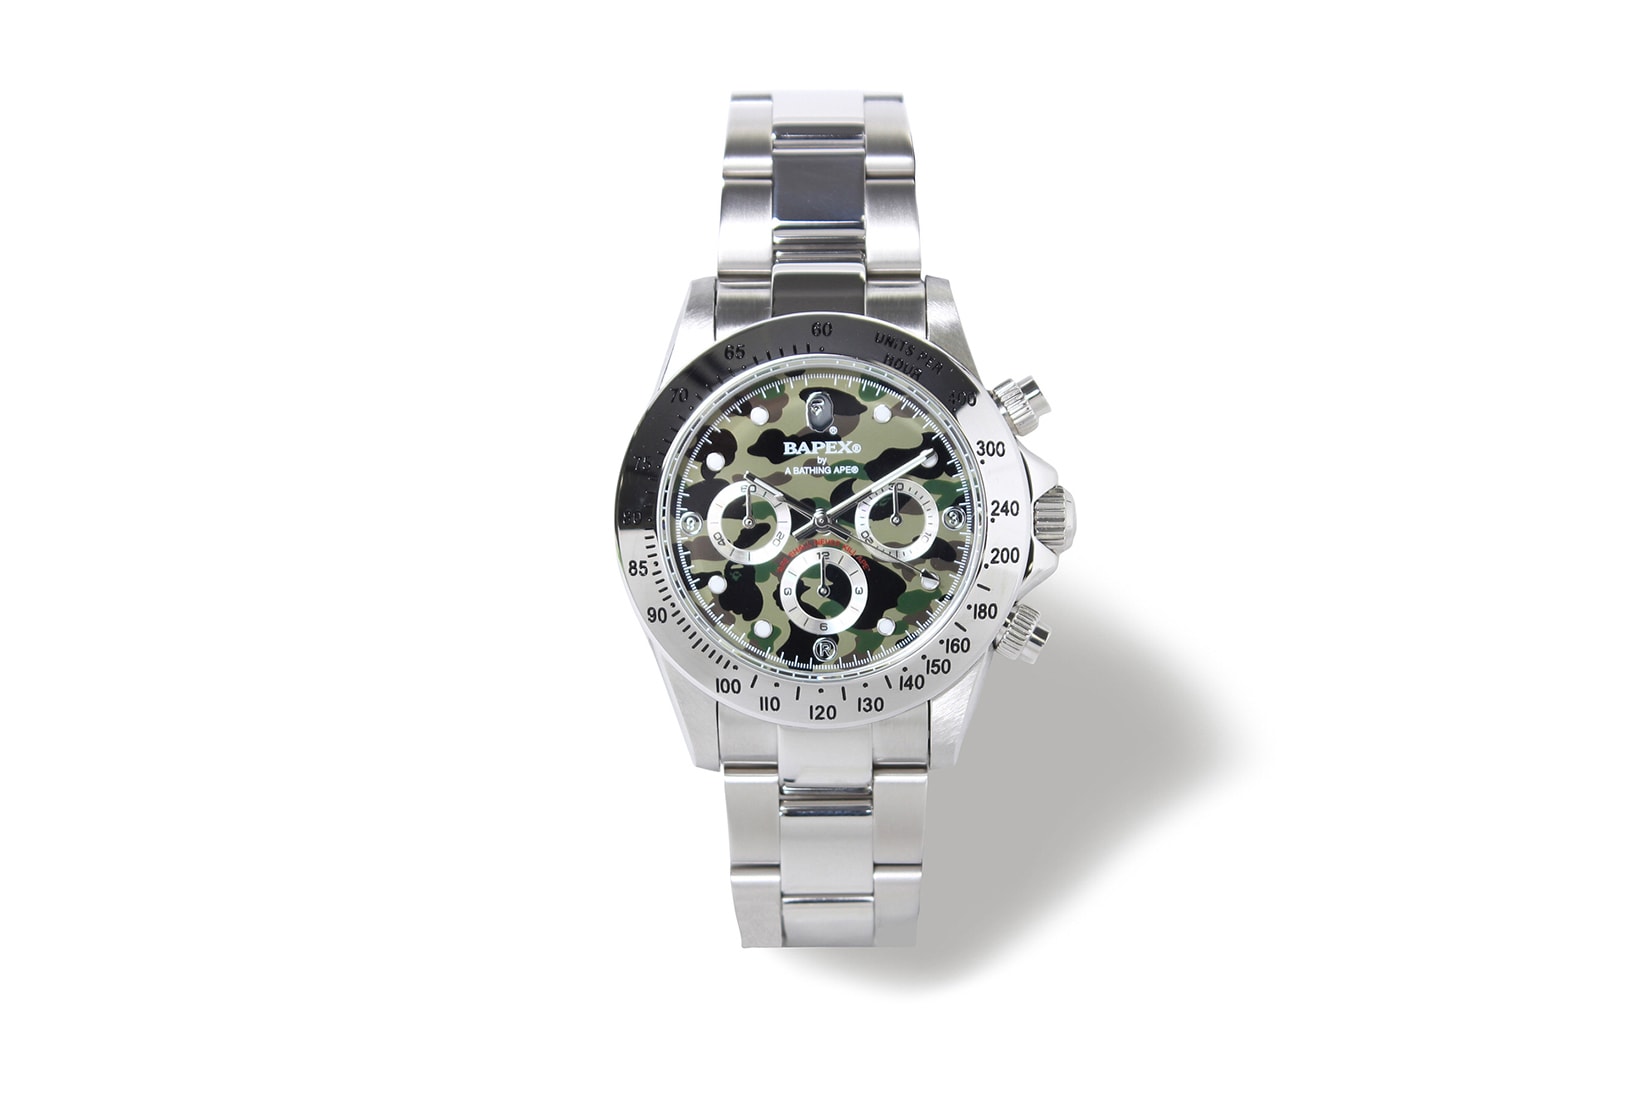 BAPE BAPEX A Bathing Ape Type 1 3 1st Camo Camouflage Watch Watches 2017 August 19 Release Date Info